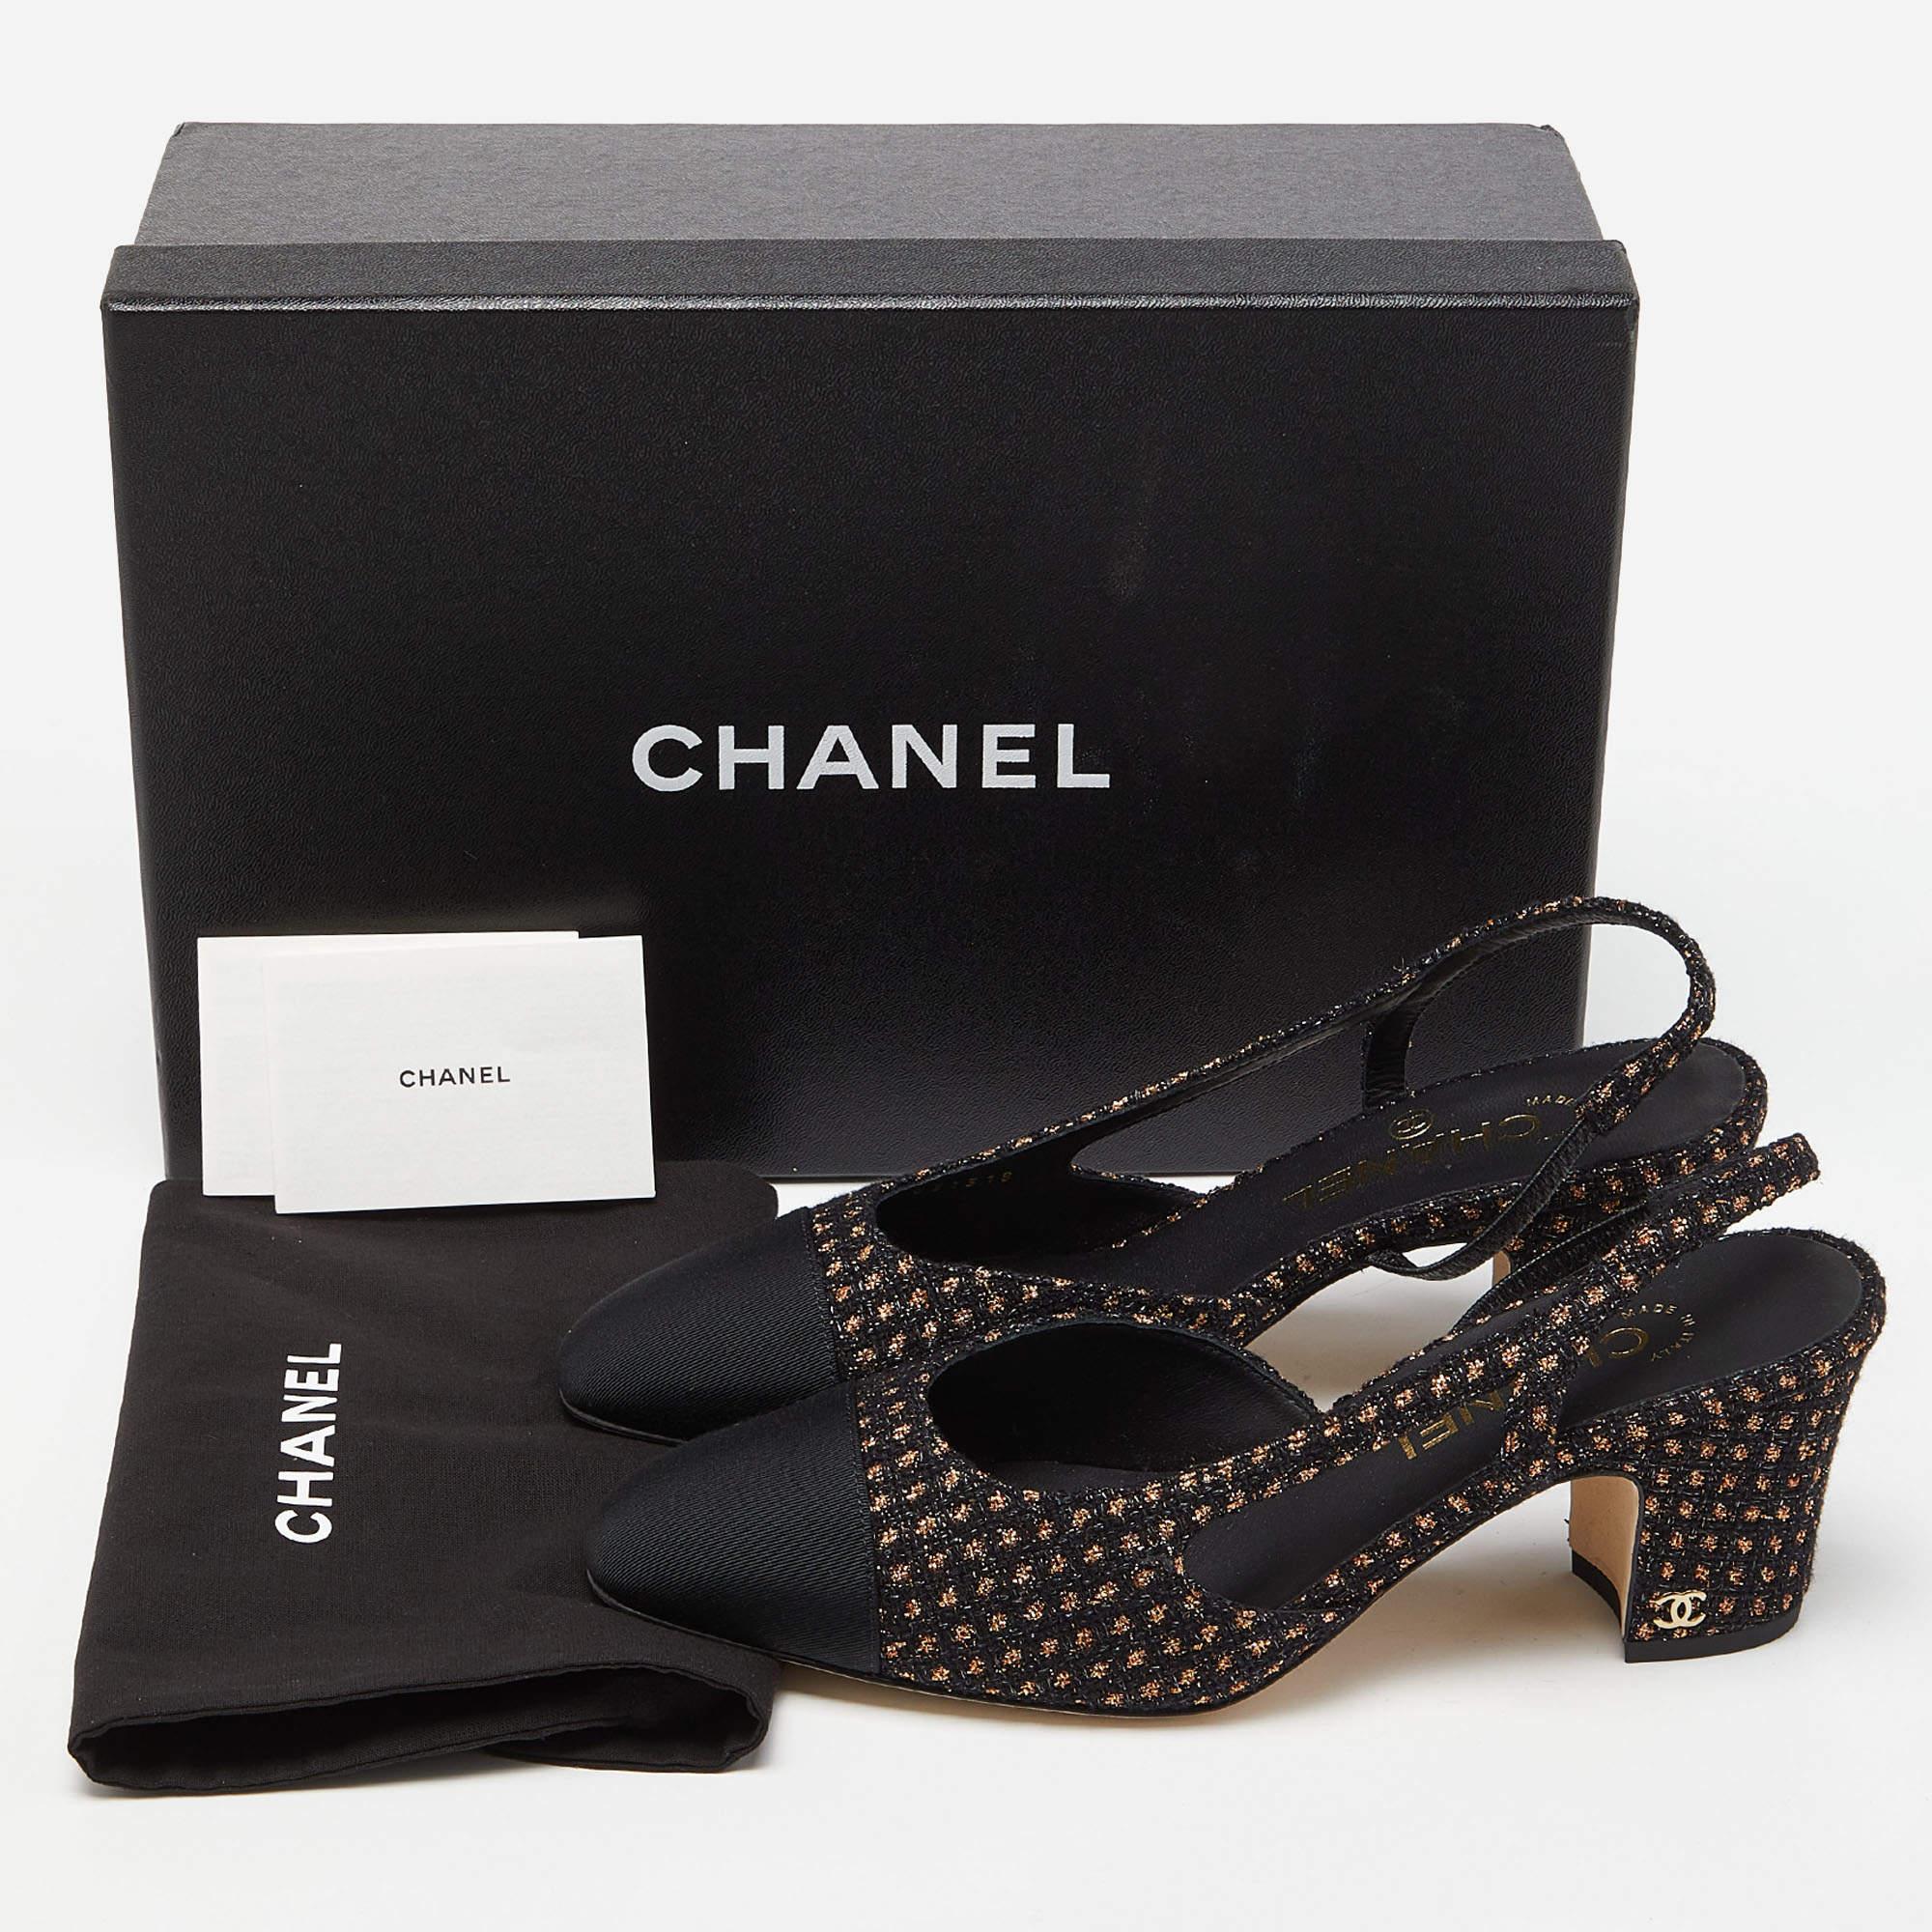 Chanel Tweed, Grosgrain and Canvas Cap Toe Slingback Sandals Size 37.5 5